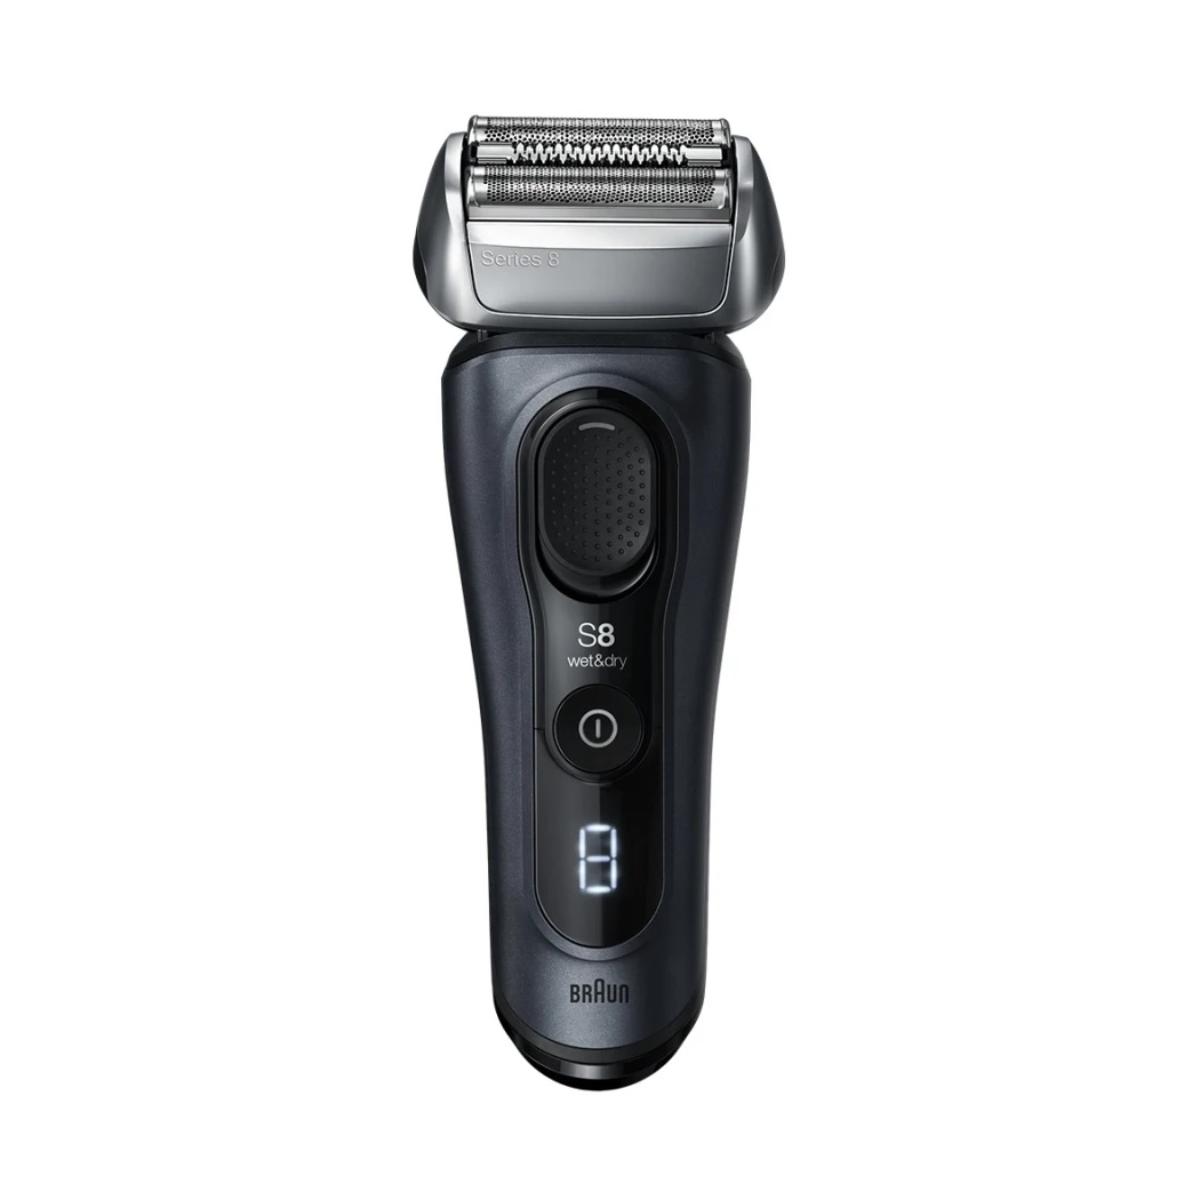 BRAUN SHAVER Helps to capture more hair: this shaver uses Braun's